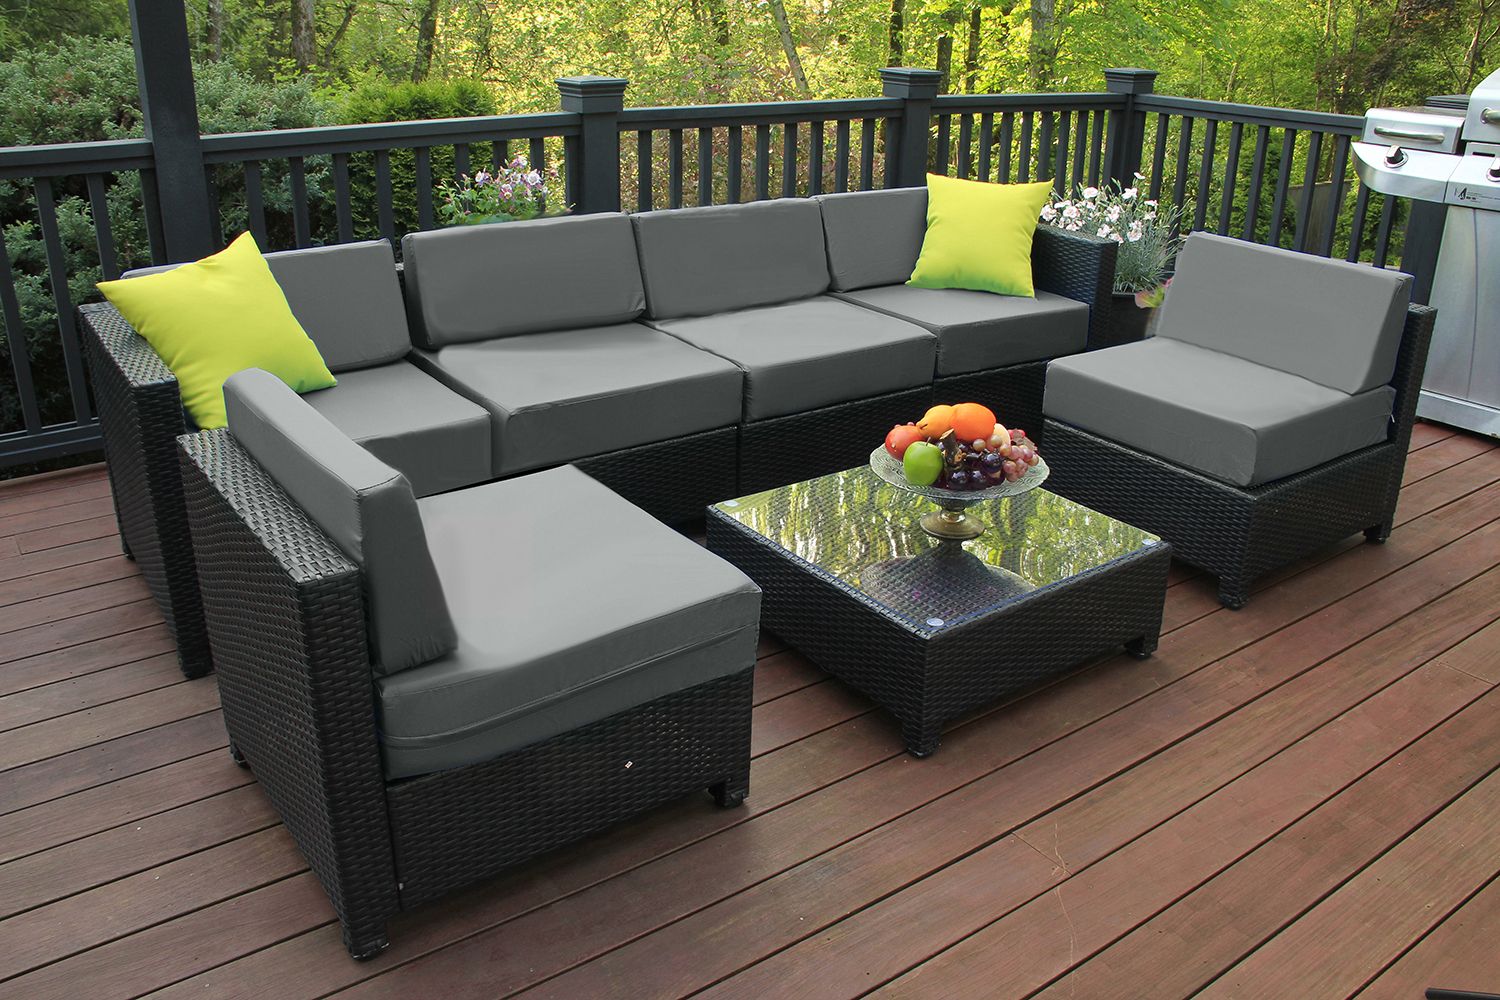 Mcombo Aluminum Outdoor Patio Furniture Sectional Set Black Wicker Sofa With Dark Brown Patio Chairs With Cushions (View 8 of 15)